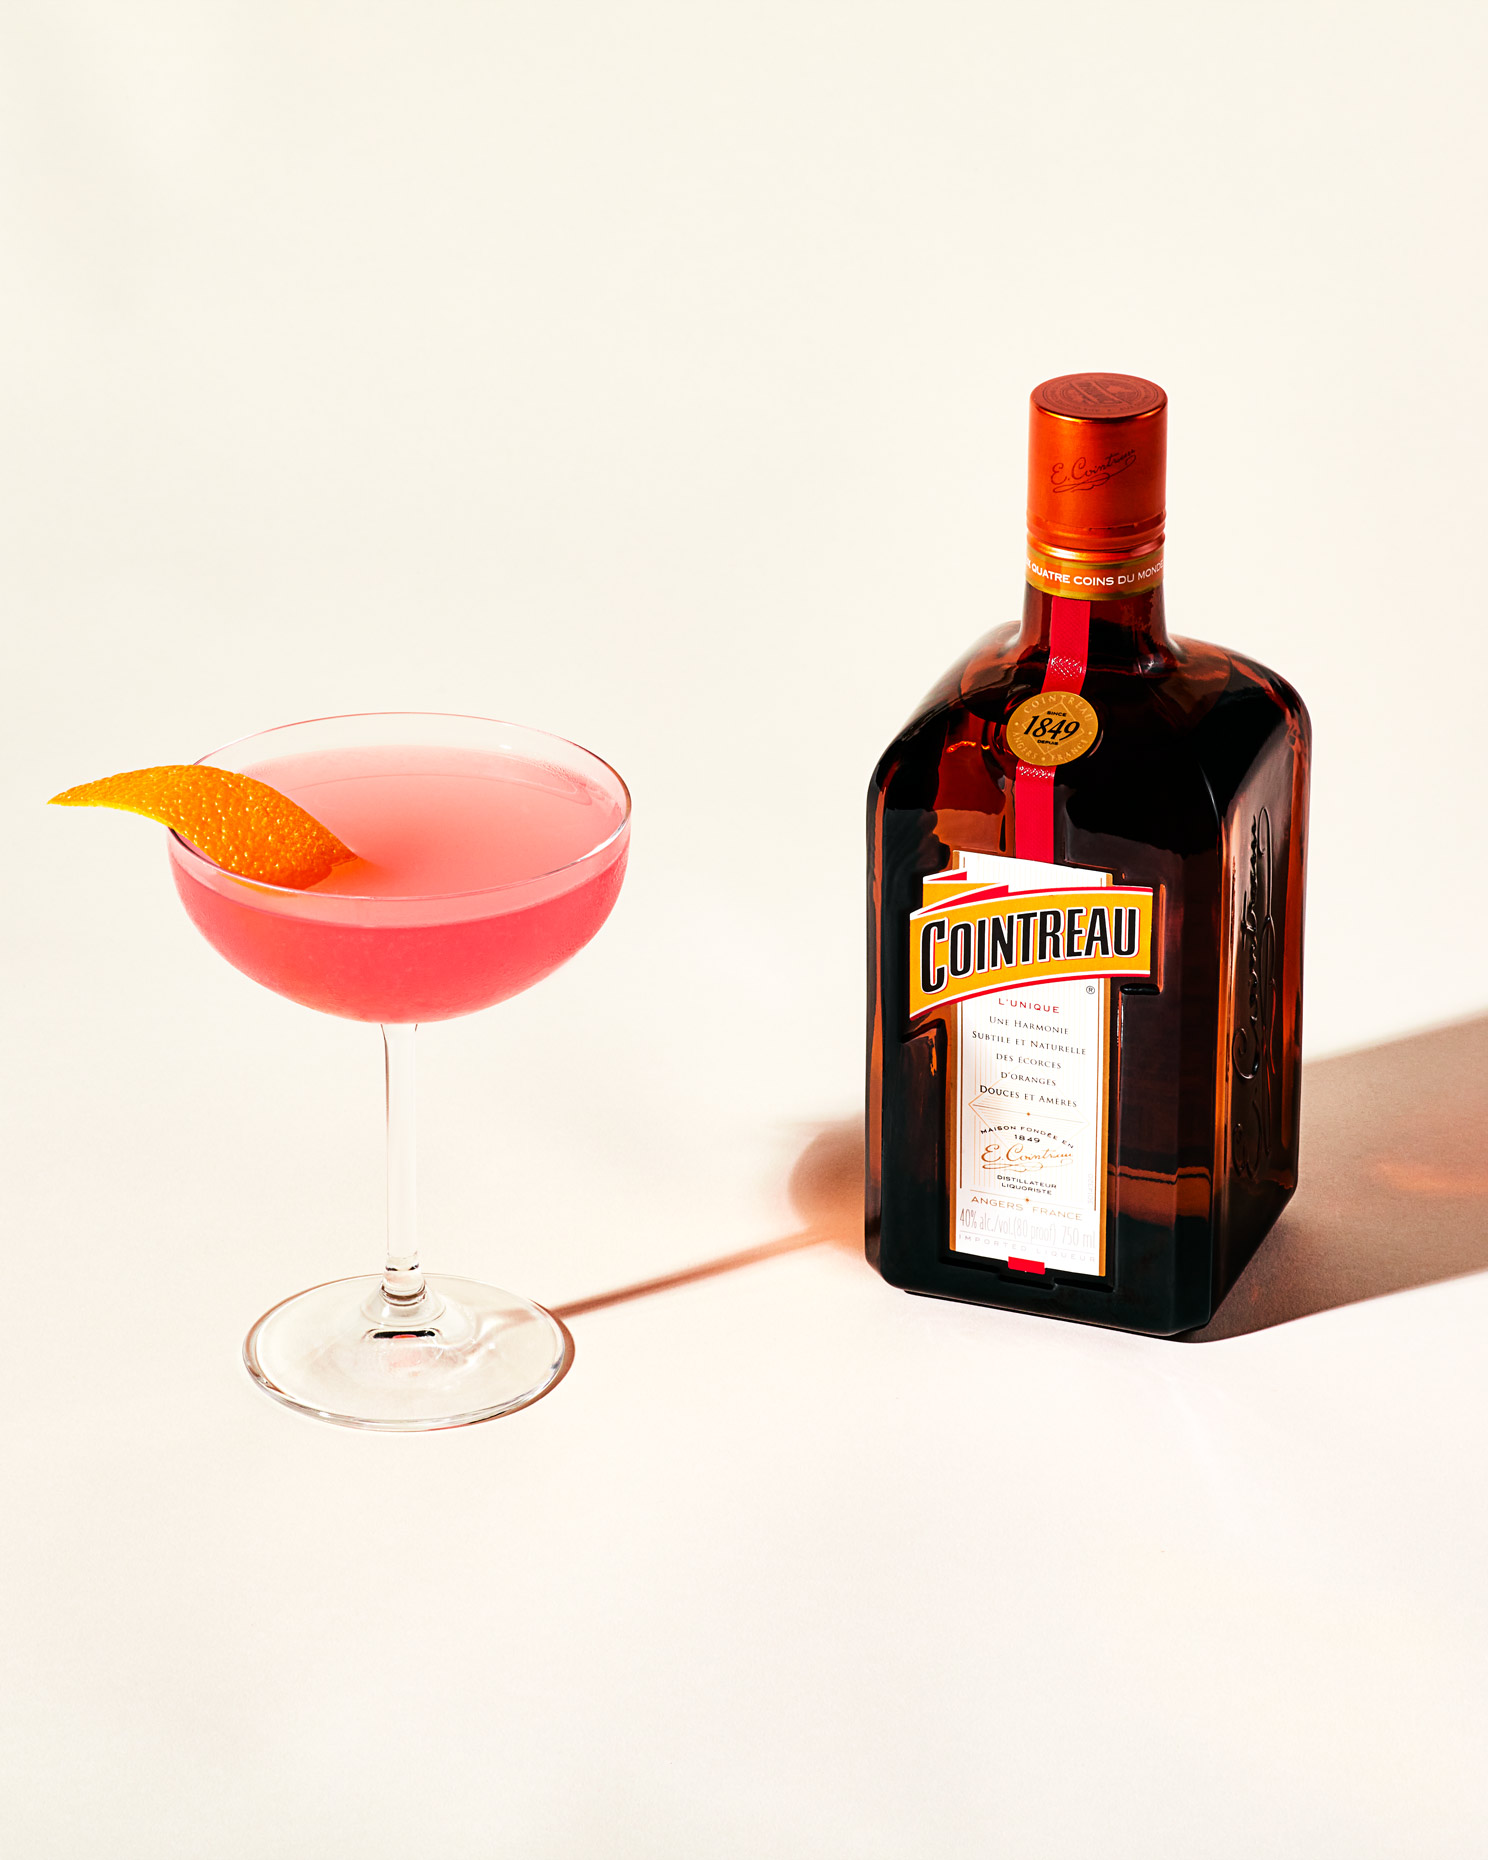 Cointreau-Cosmo-Zest-Cocktail-Rick-Holbrook-Beverage-Photography-Cocktails